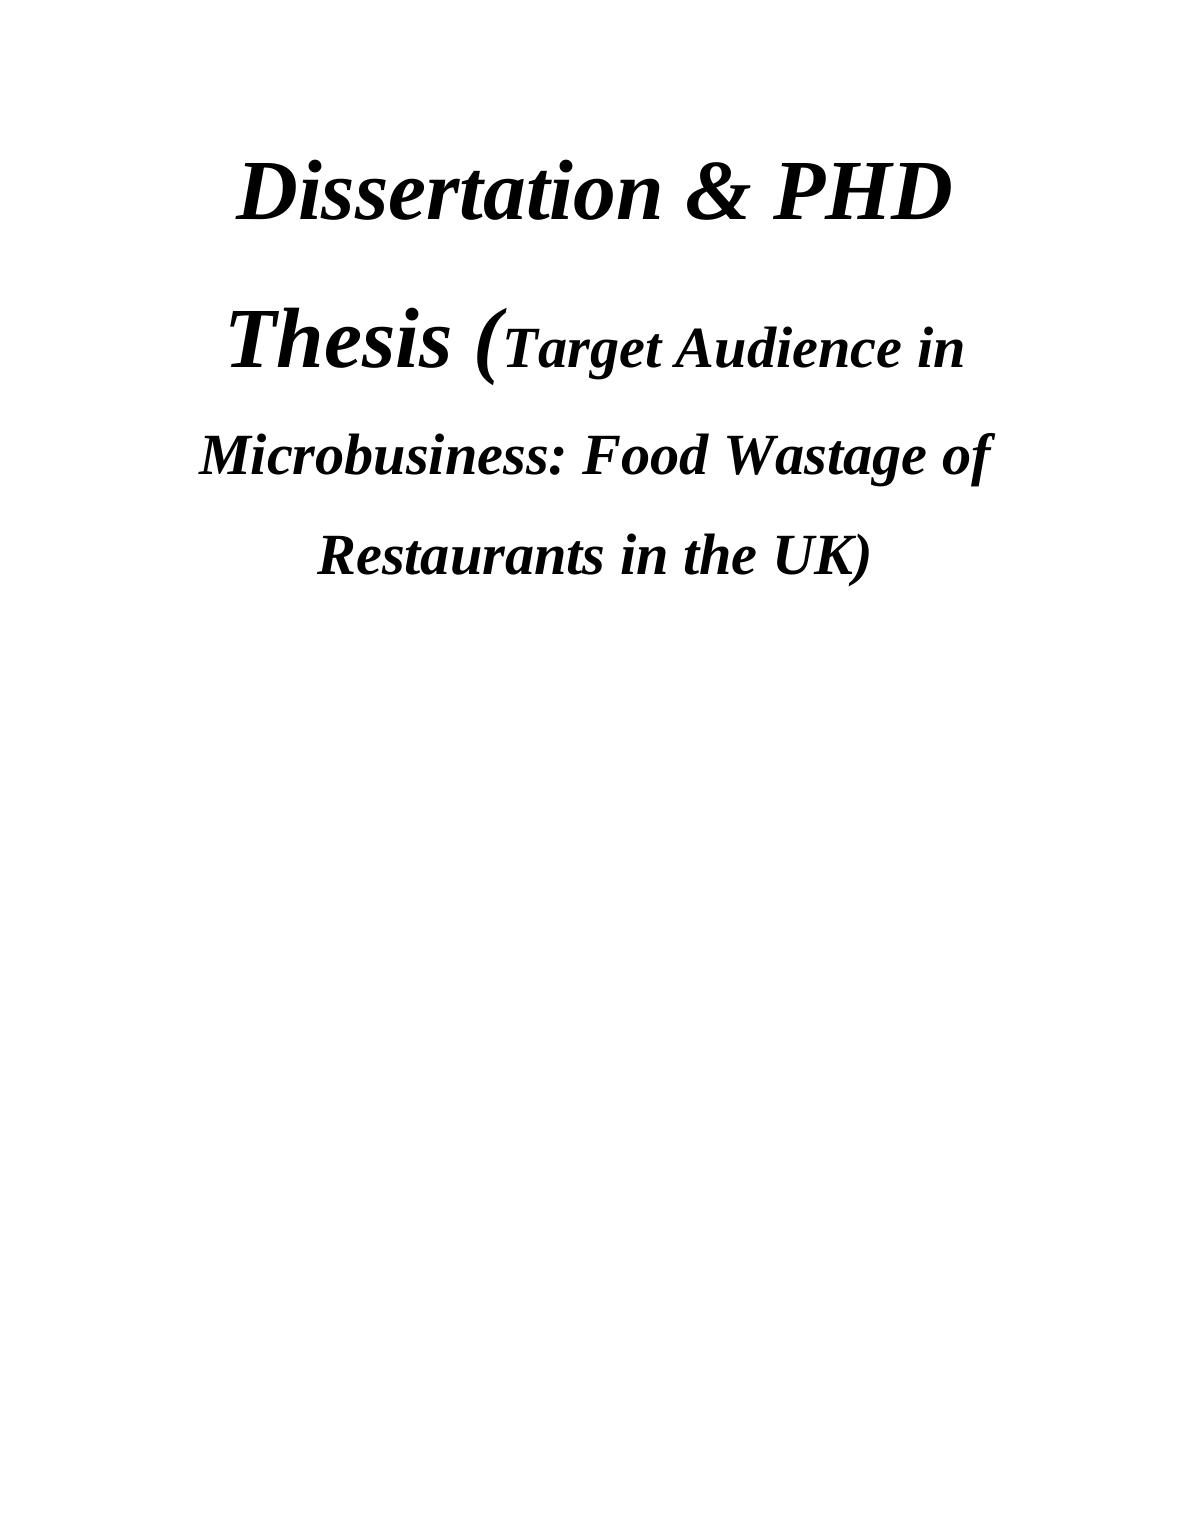 Target Audience in Microbusiness: Food Wastage of Restaurants in the UK_1